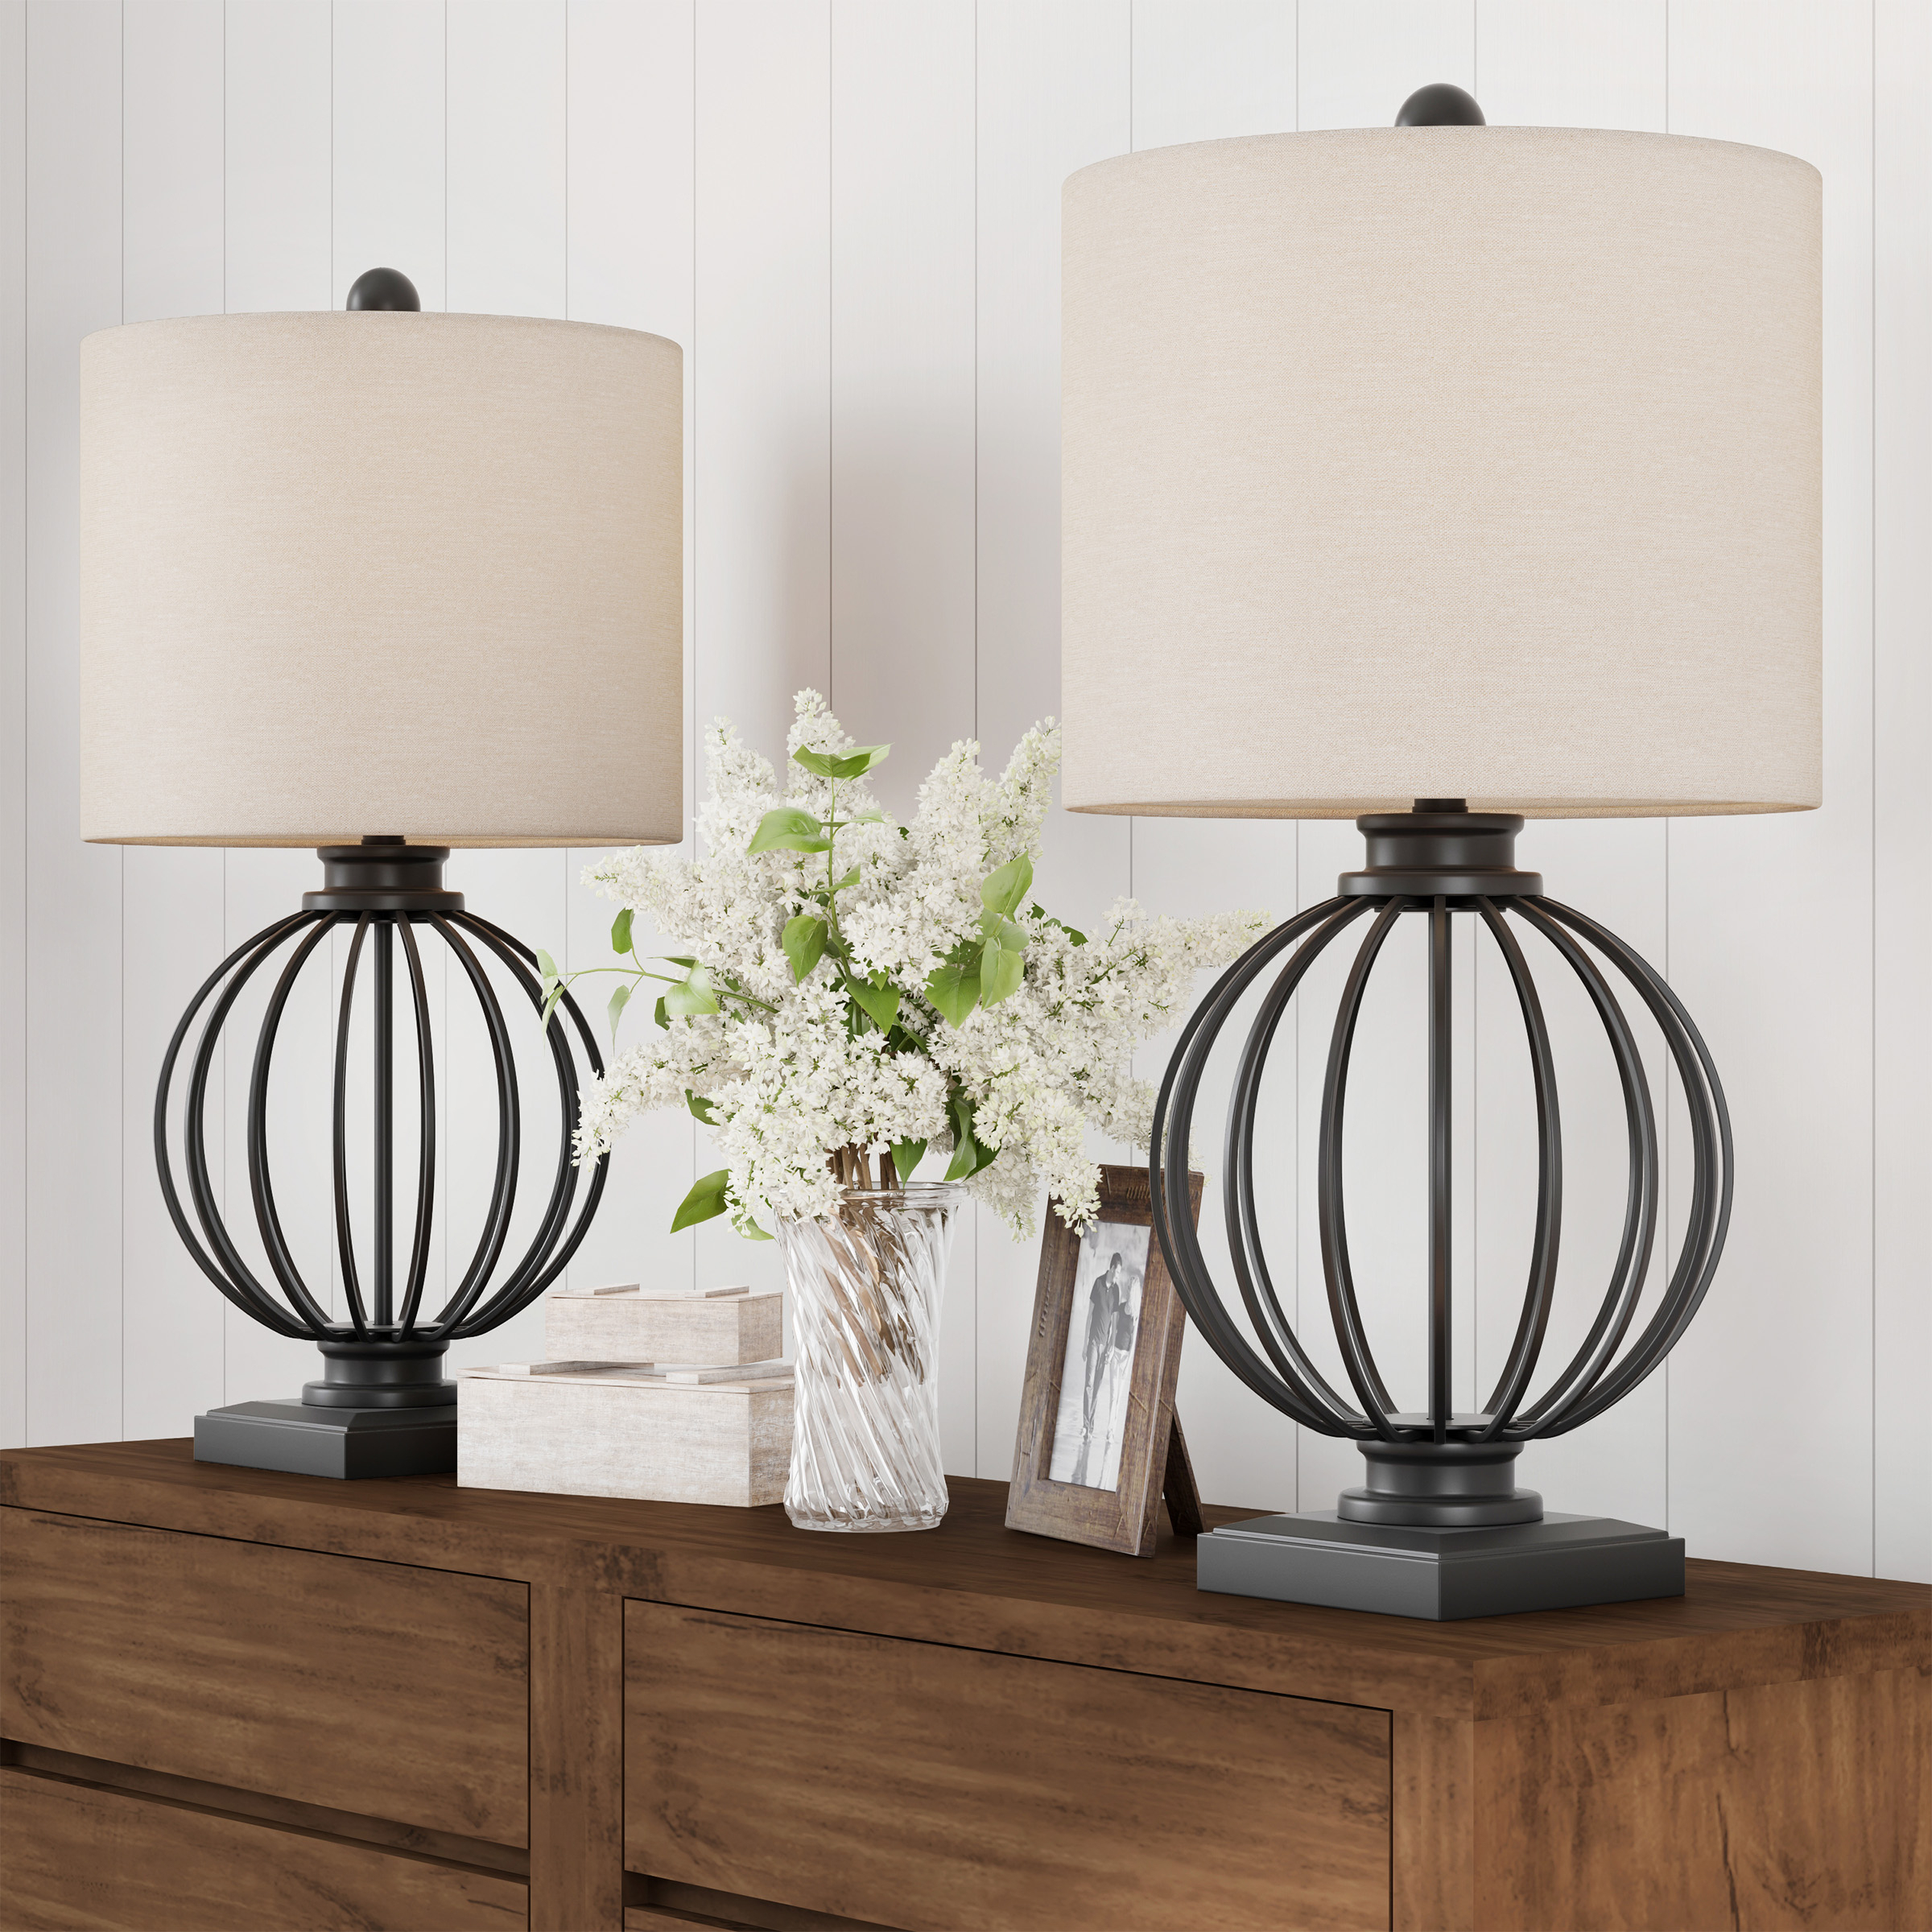 Table Lamps-Set Of 2 Wrought Iron Open Cage Orb Lights, Bulbs And Linen Shades Included-Modern Rustic